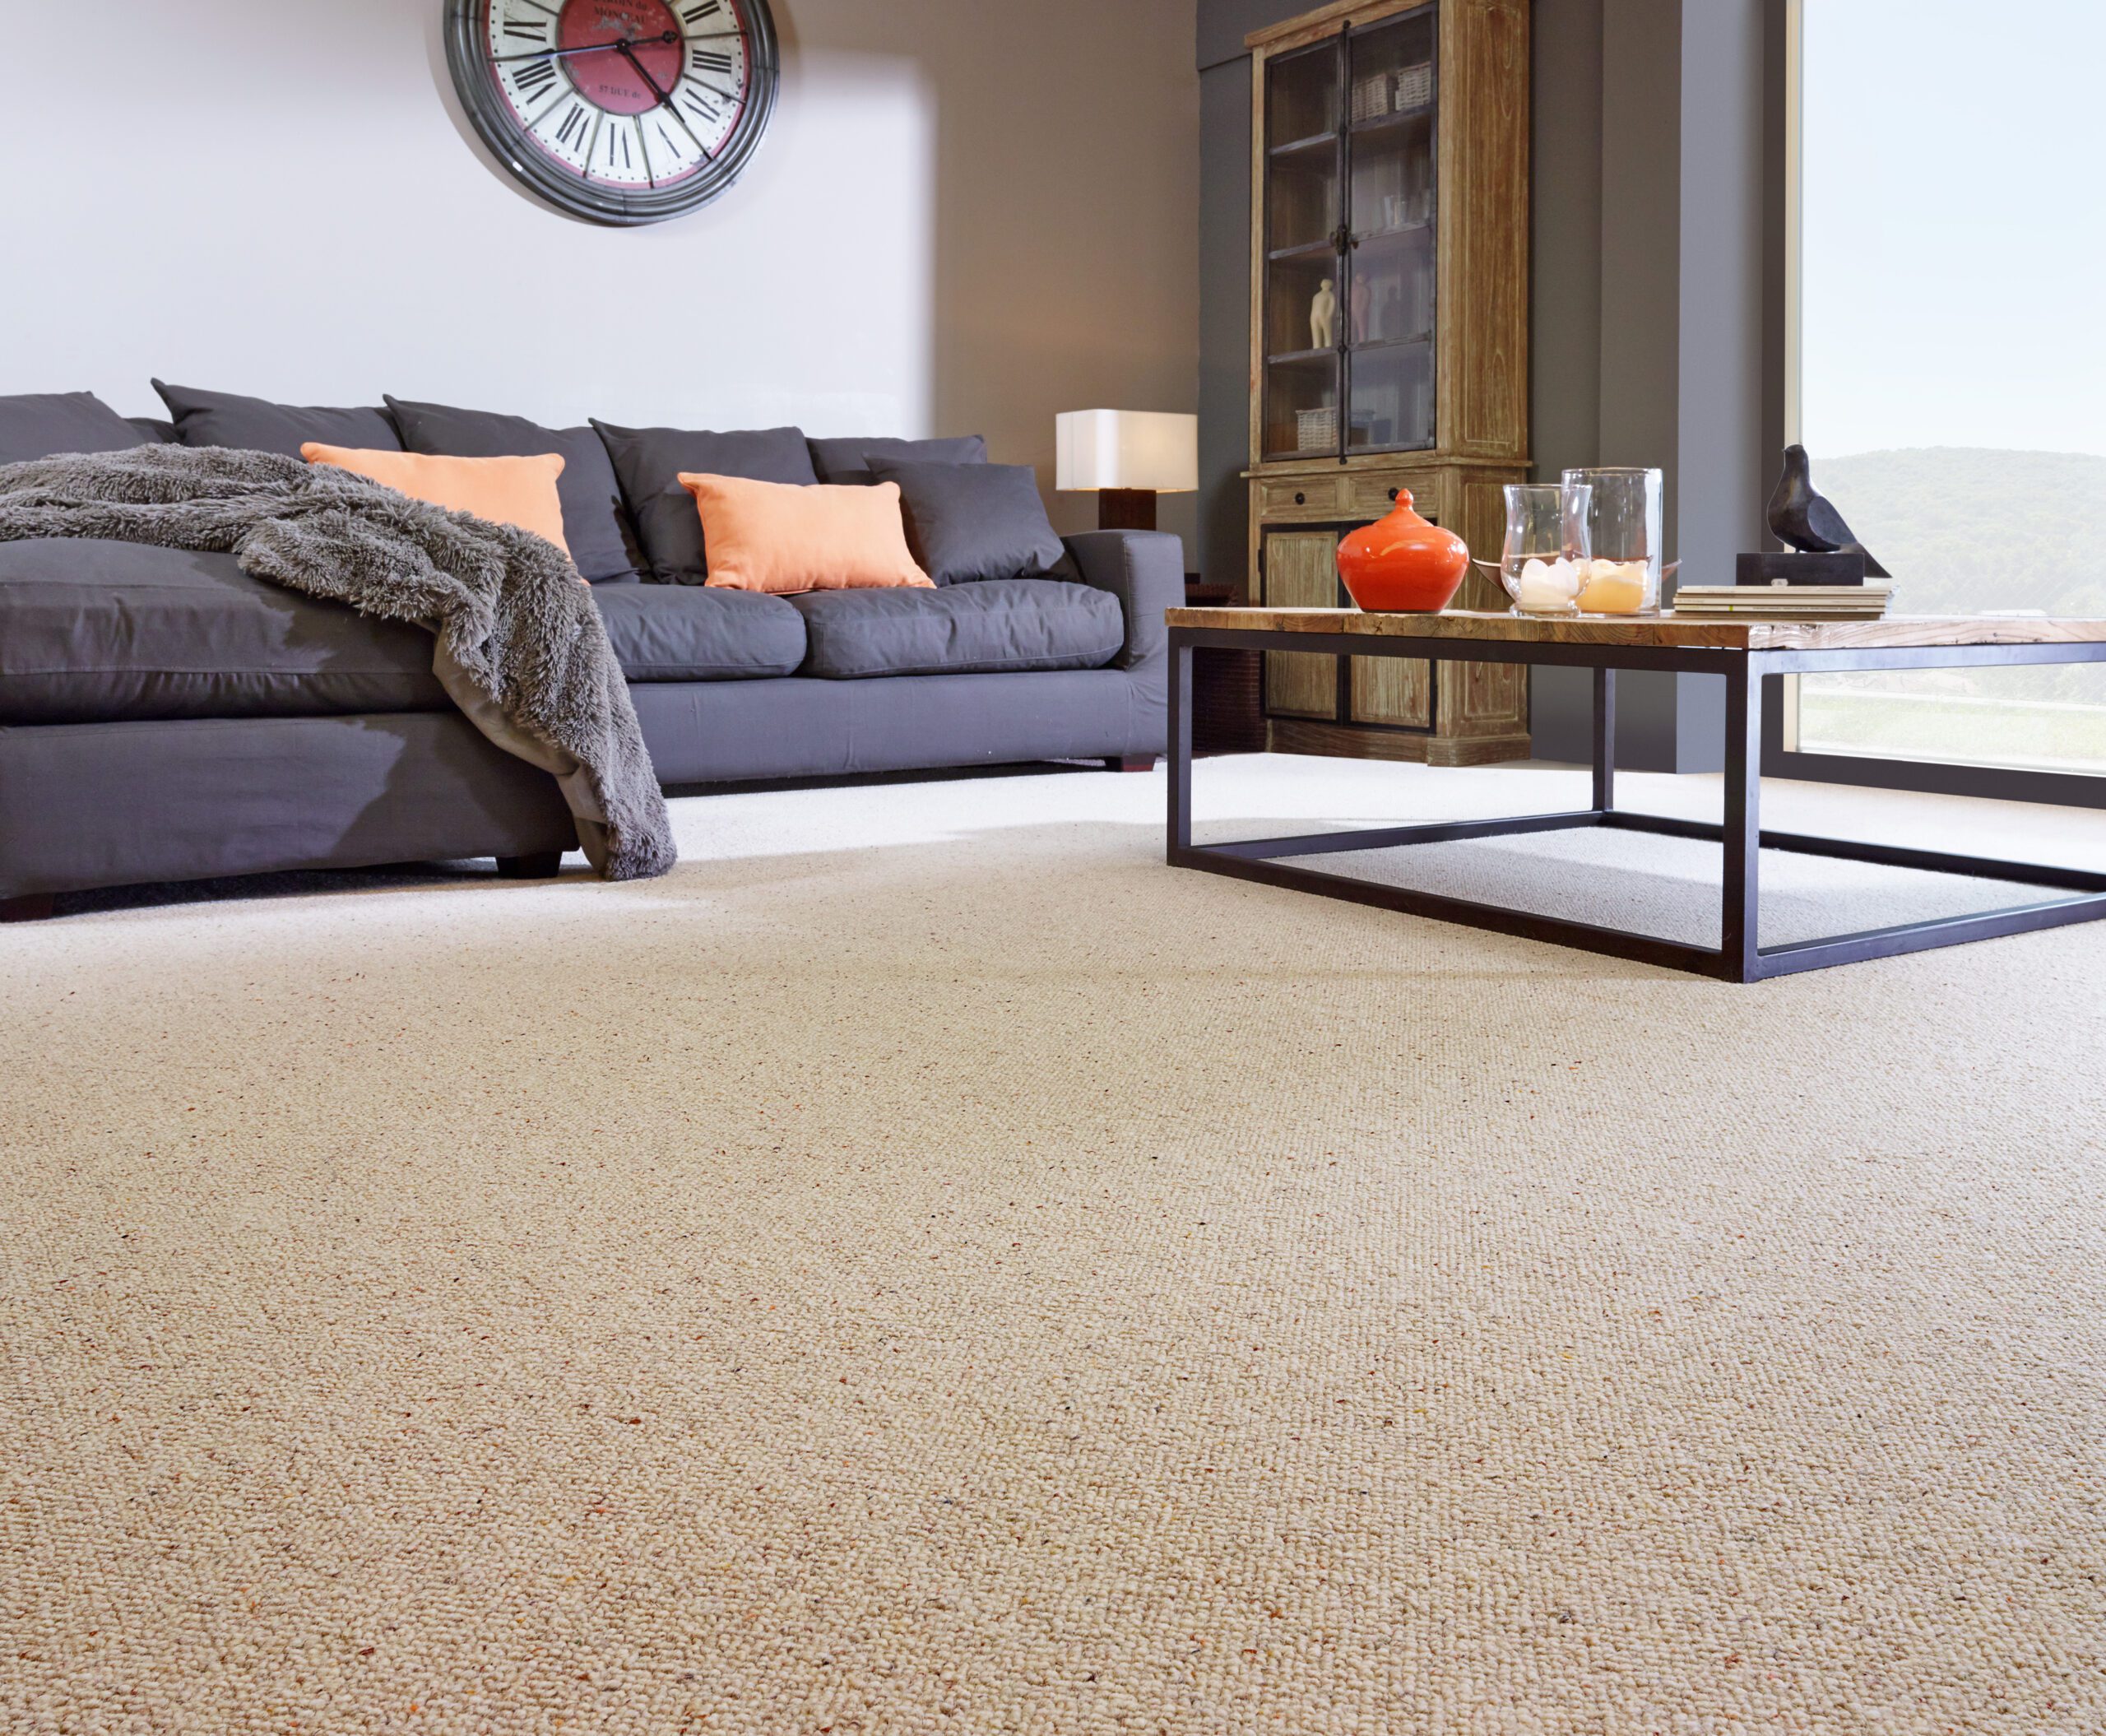 The Budget-Friendly Guide to Finding High-Quality Carpets